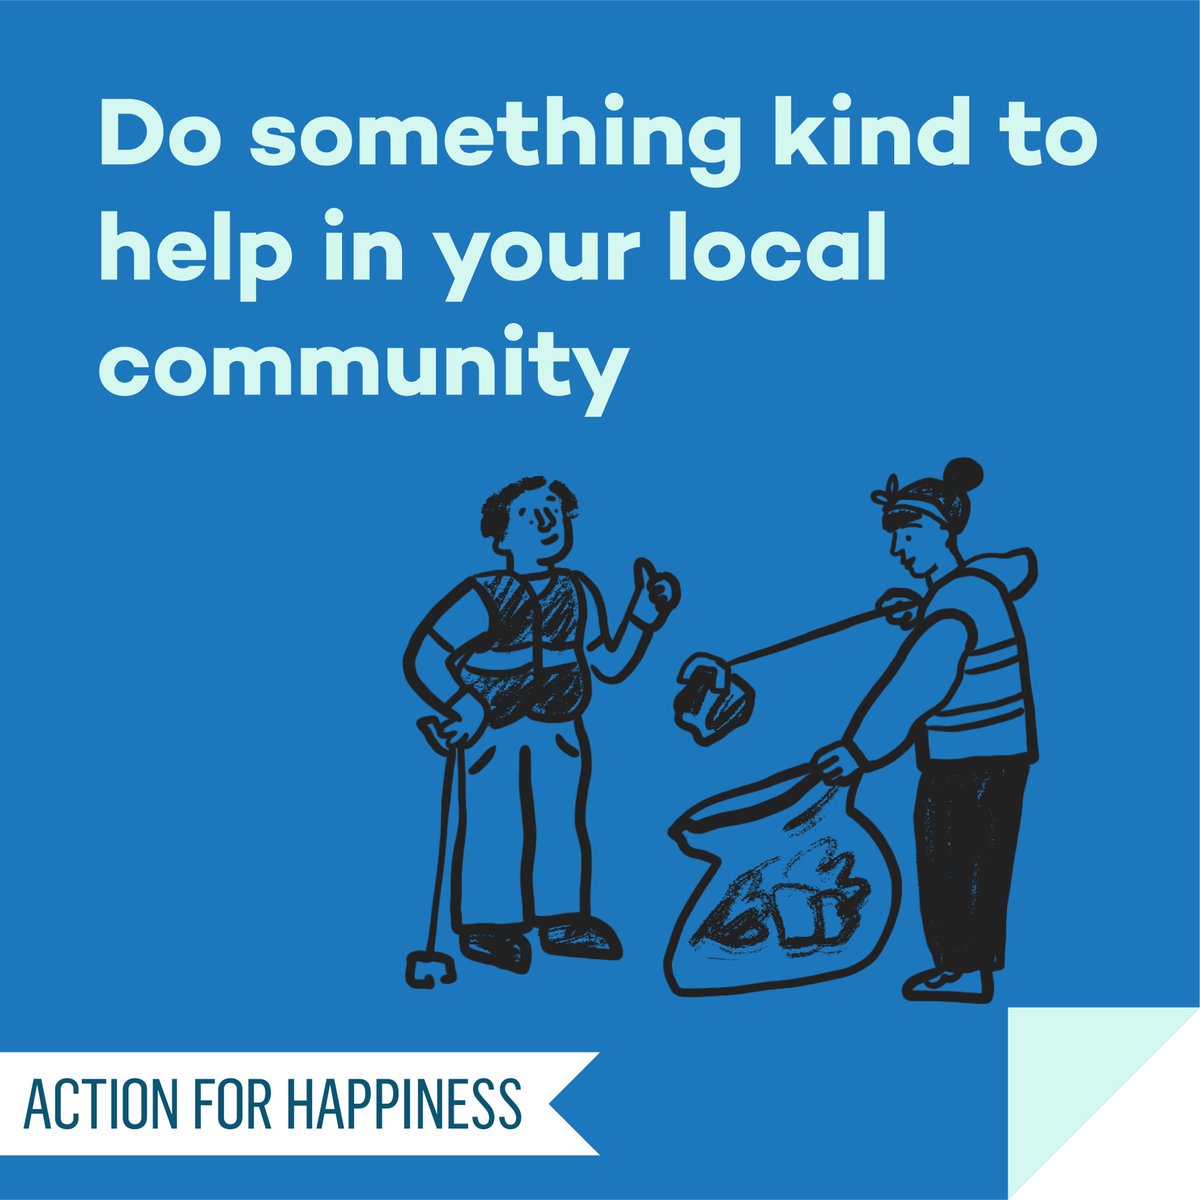 Altruistic August - Day 29: Do something kind to help in your local community actionforhappiness.org/altruistic-aug… #AltruisticAugust